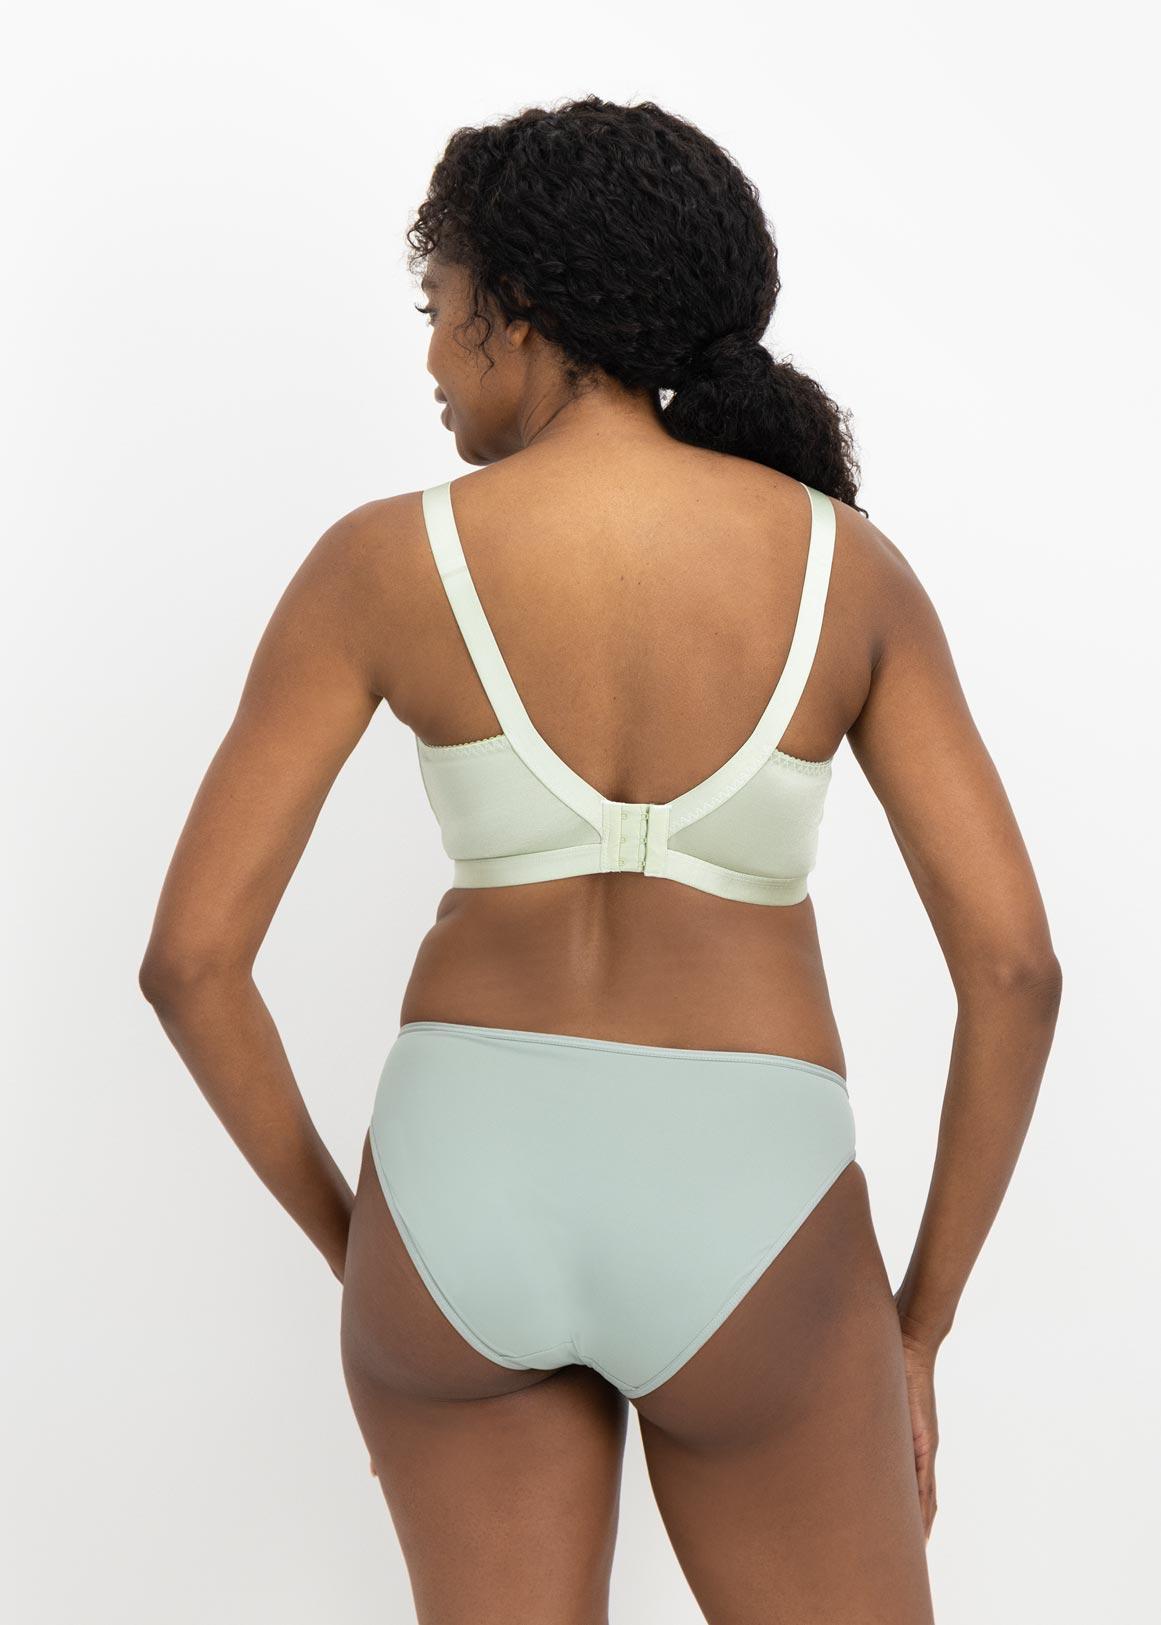 Cotton Divide - Non-wired cotton bra with a smart pocket that